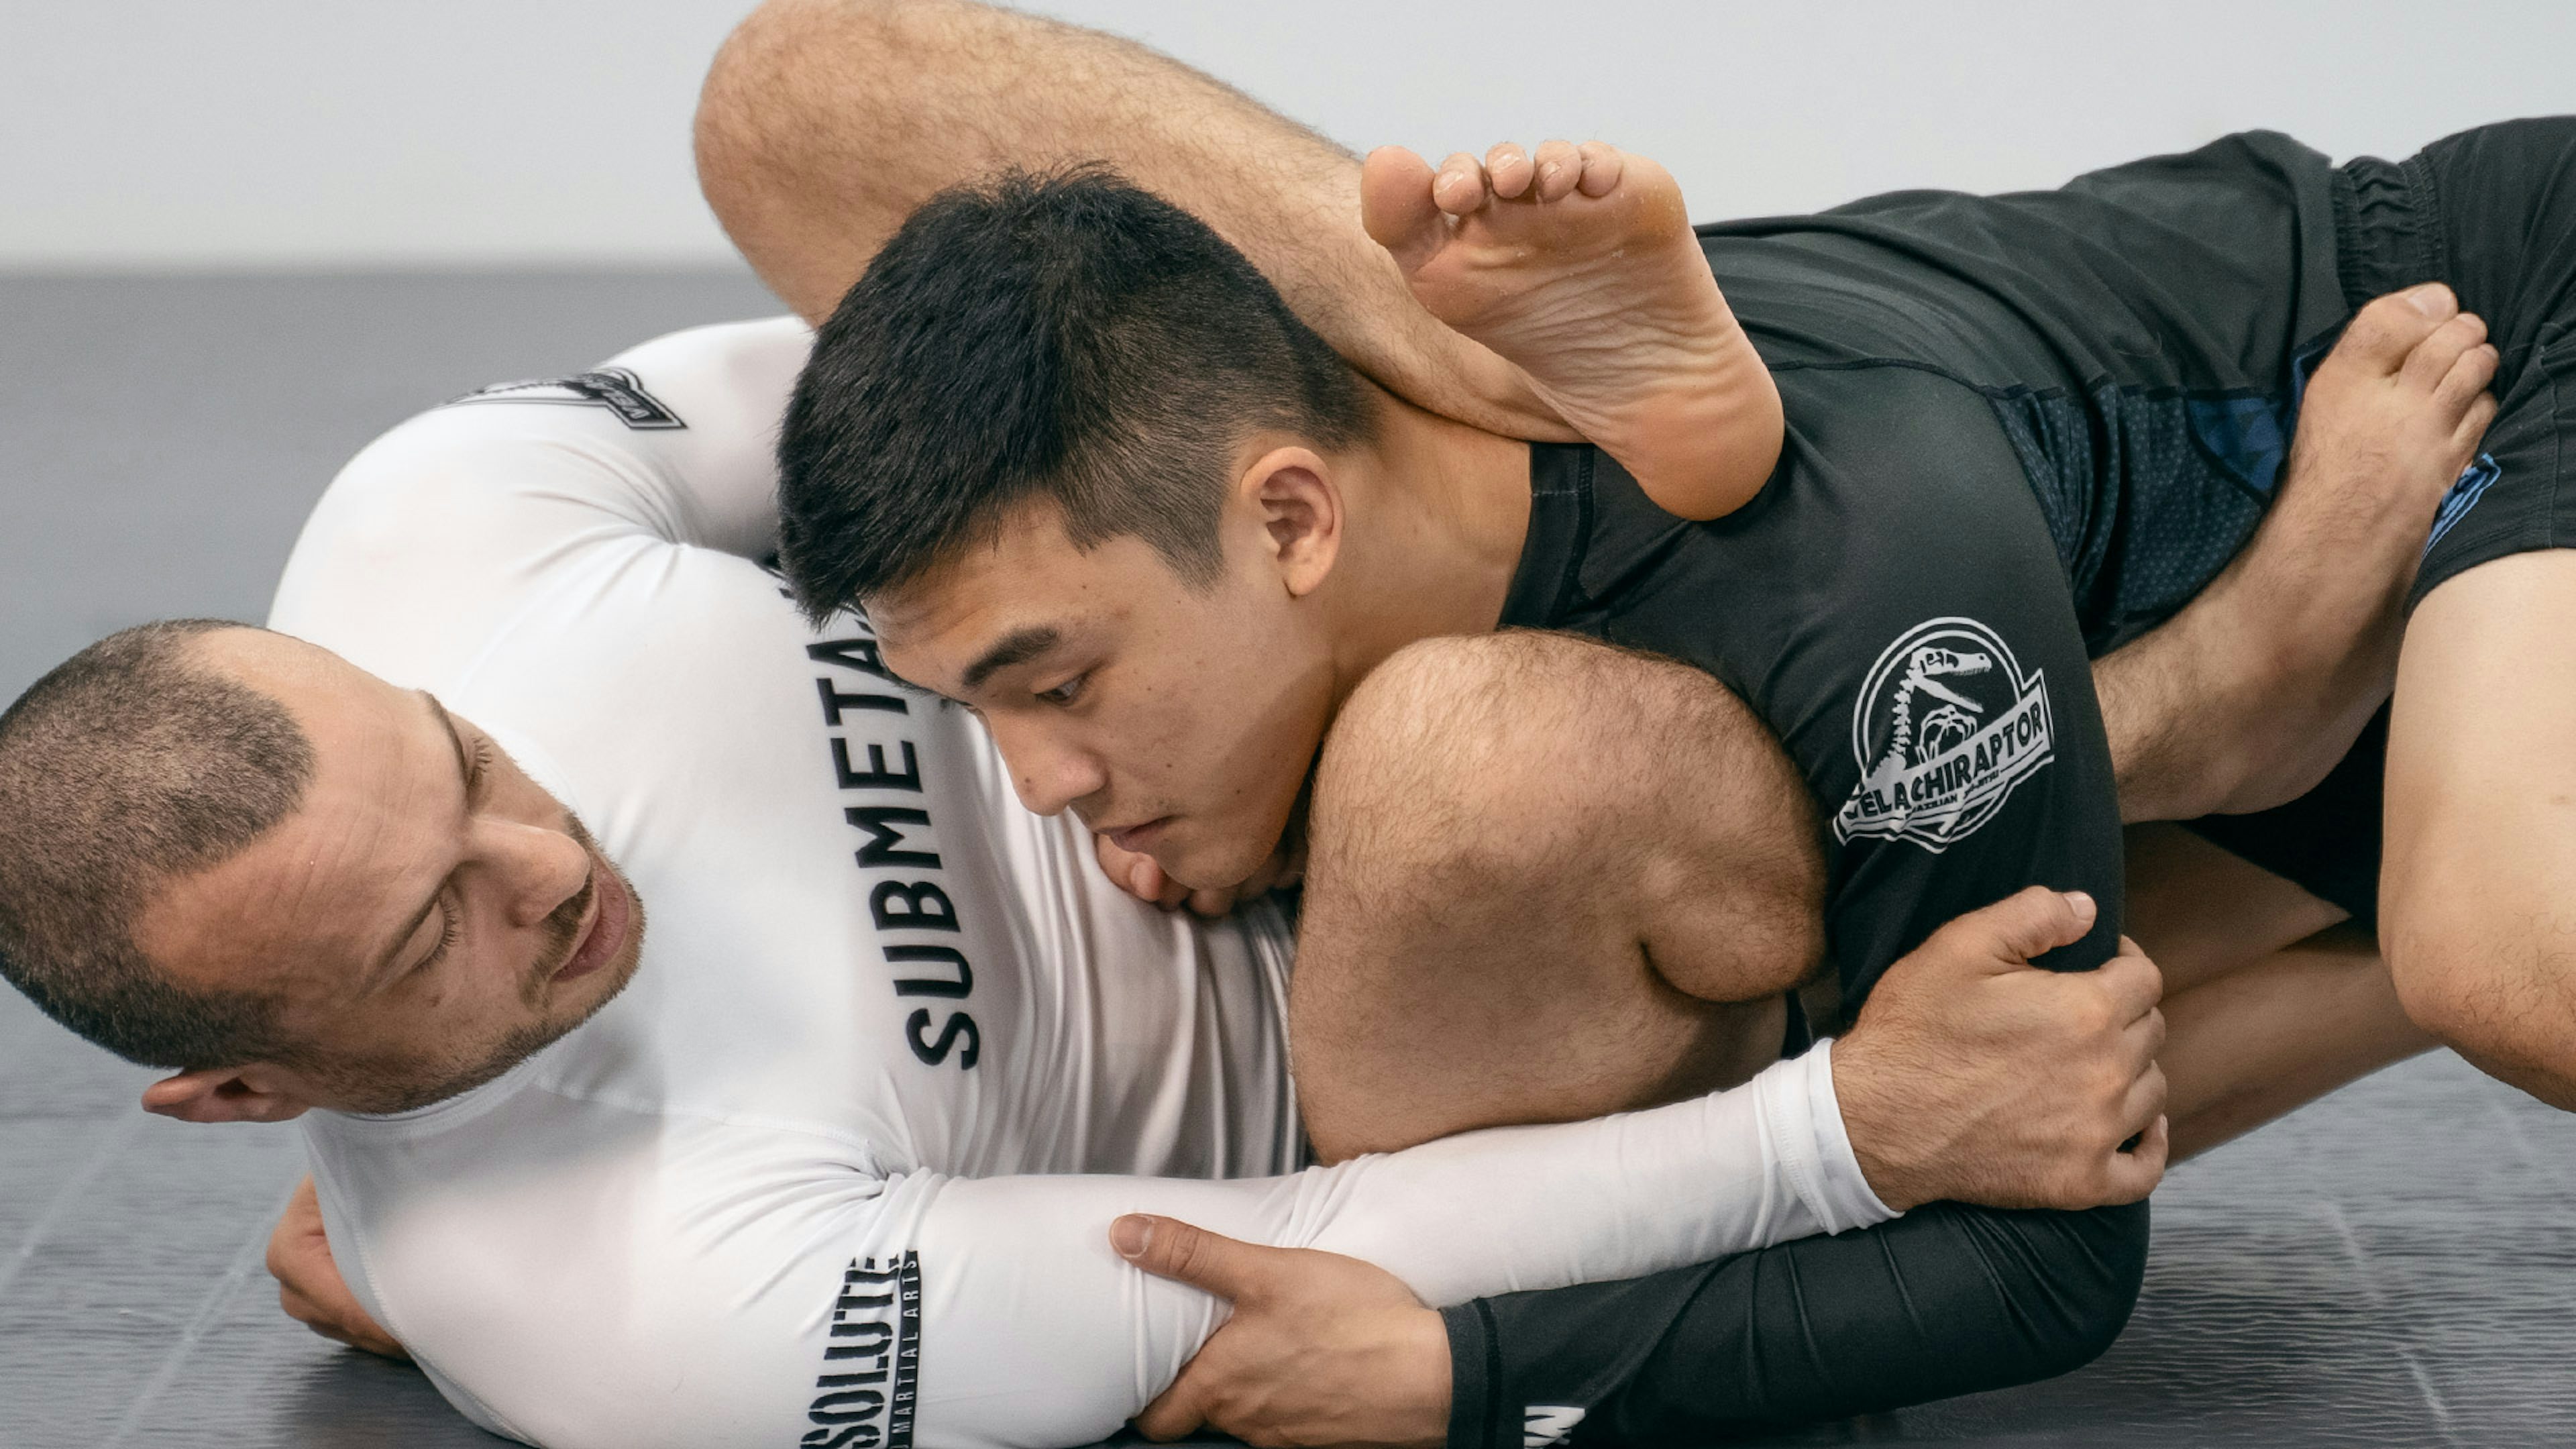 Overhook Closed Guard” by Lachlan Giles • SUBMETA